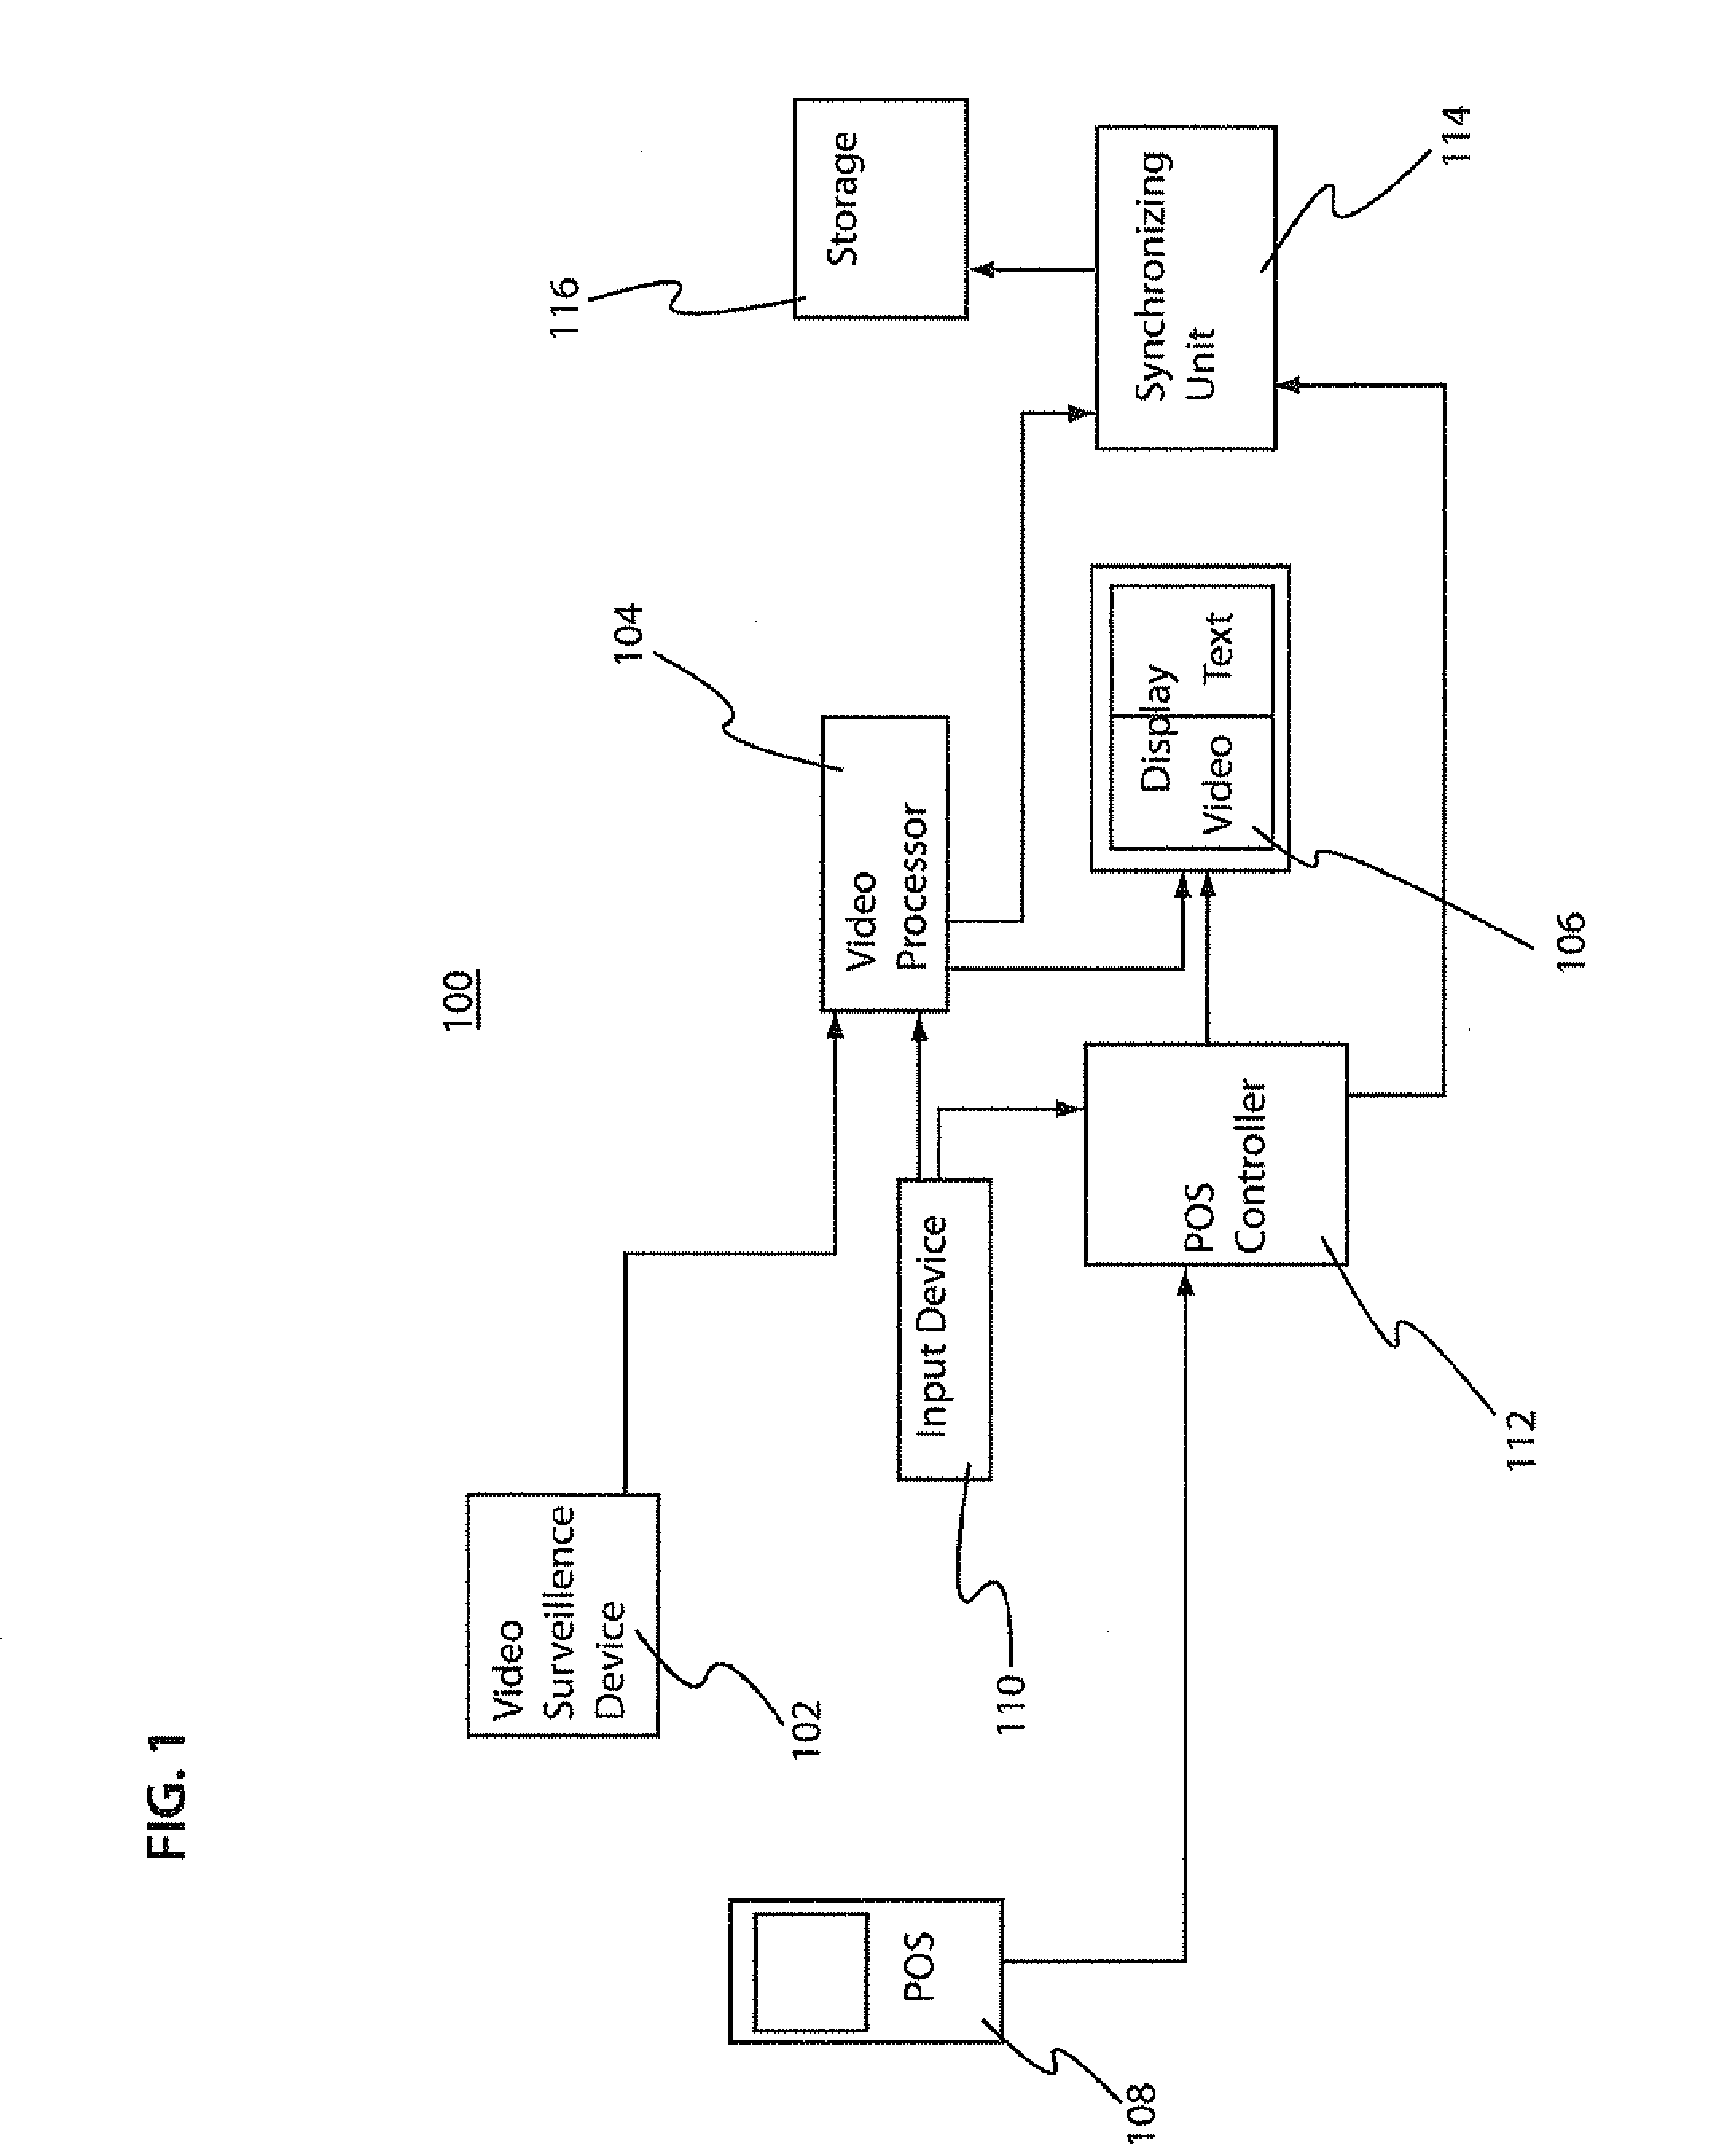 System and method for providing creation of on-side text for video surveillance